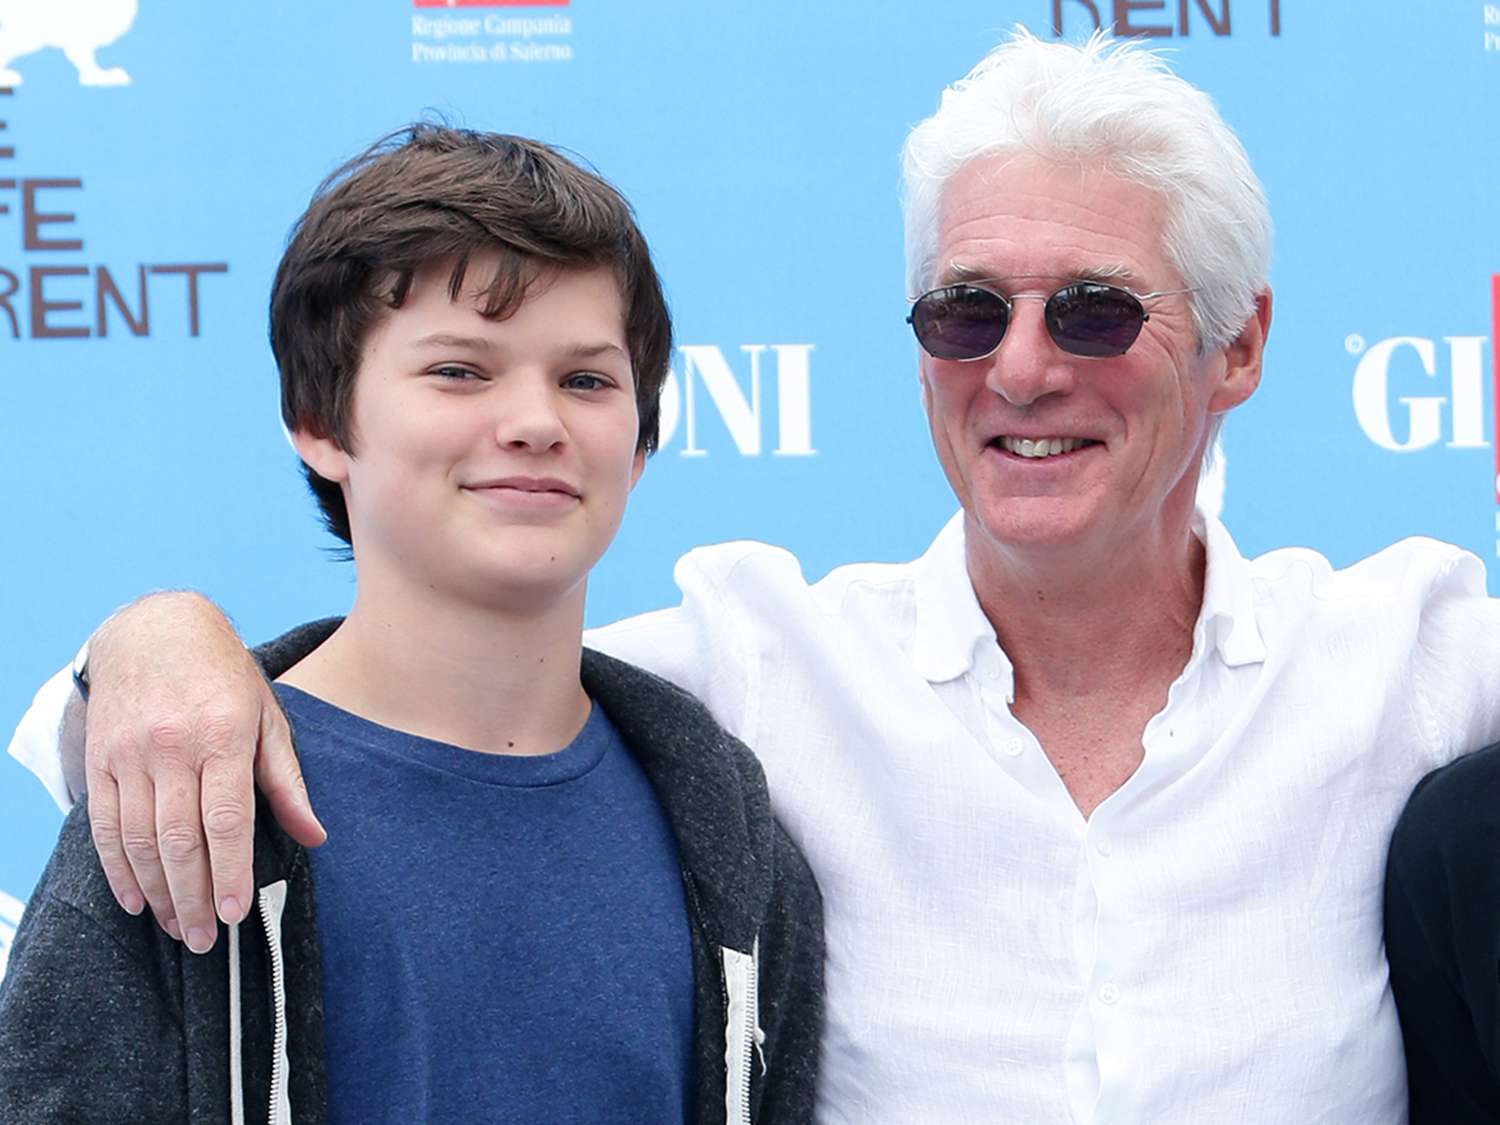 Richard Gere’s Son, Homer James Jigme Gere Biography: Net Worth, Age, Instagram, Siblings, Wikipedia, Height, Mother